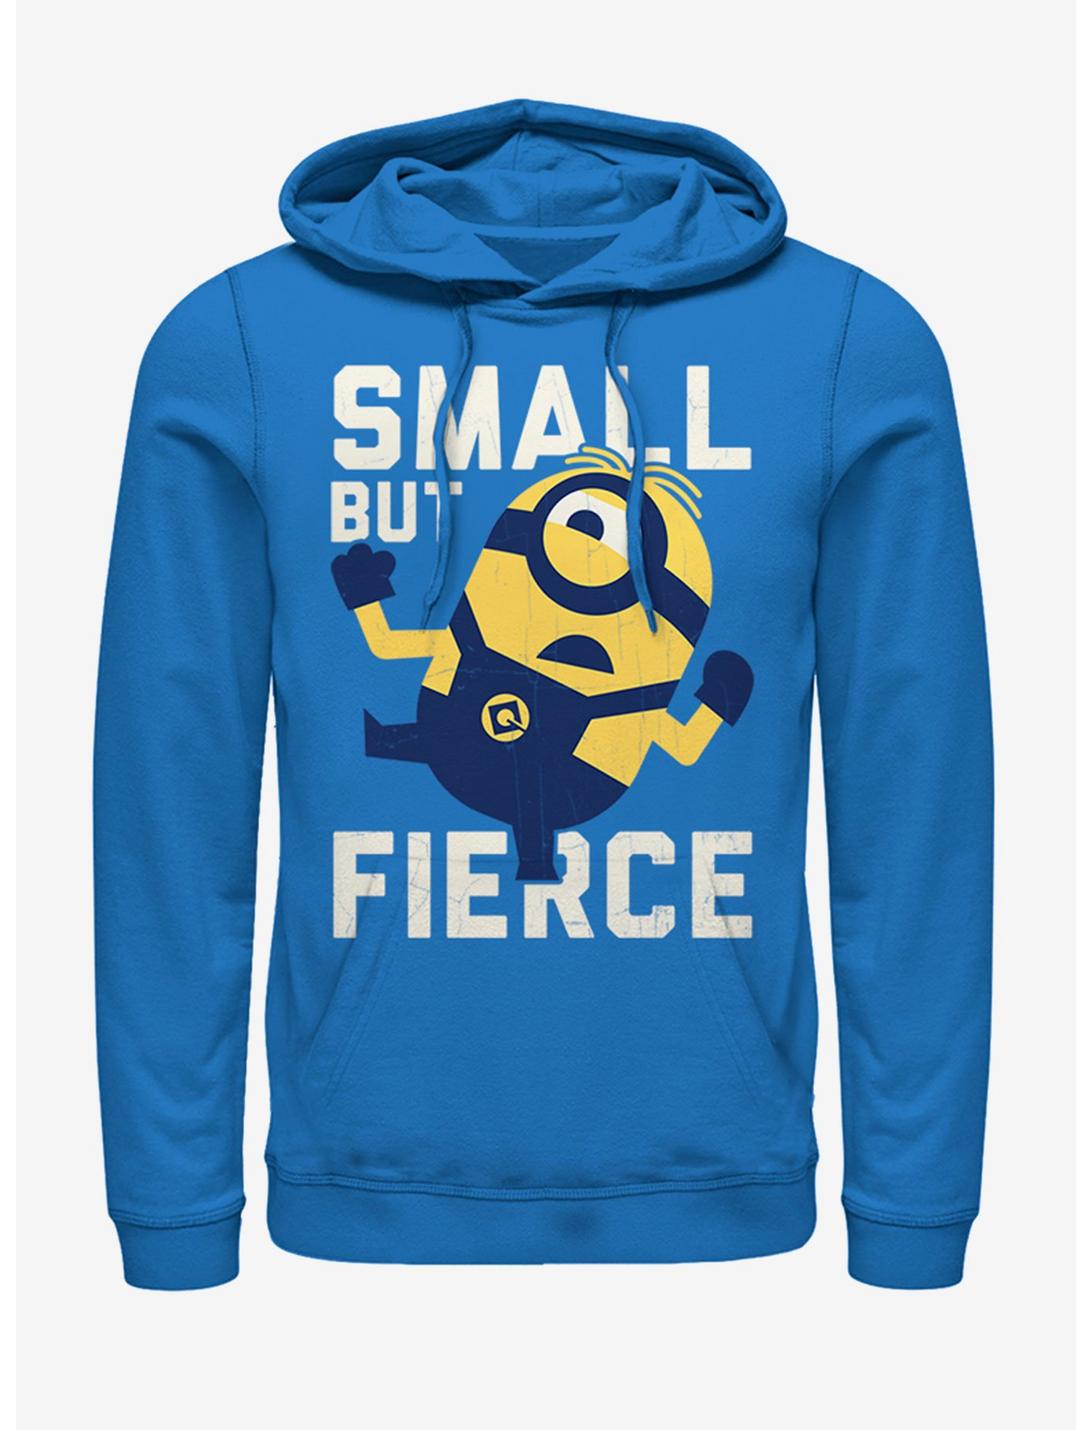 Minions Small and Fierce Hoodie, ROYAL, hi-res